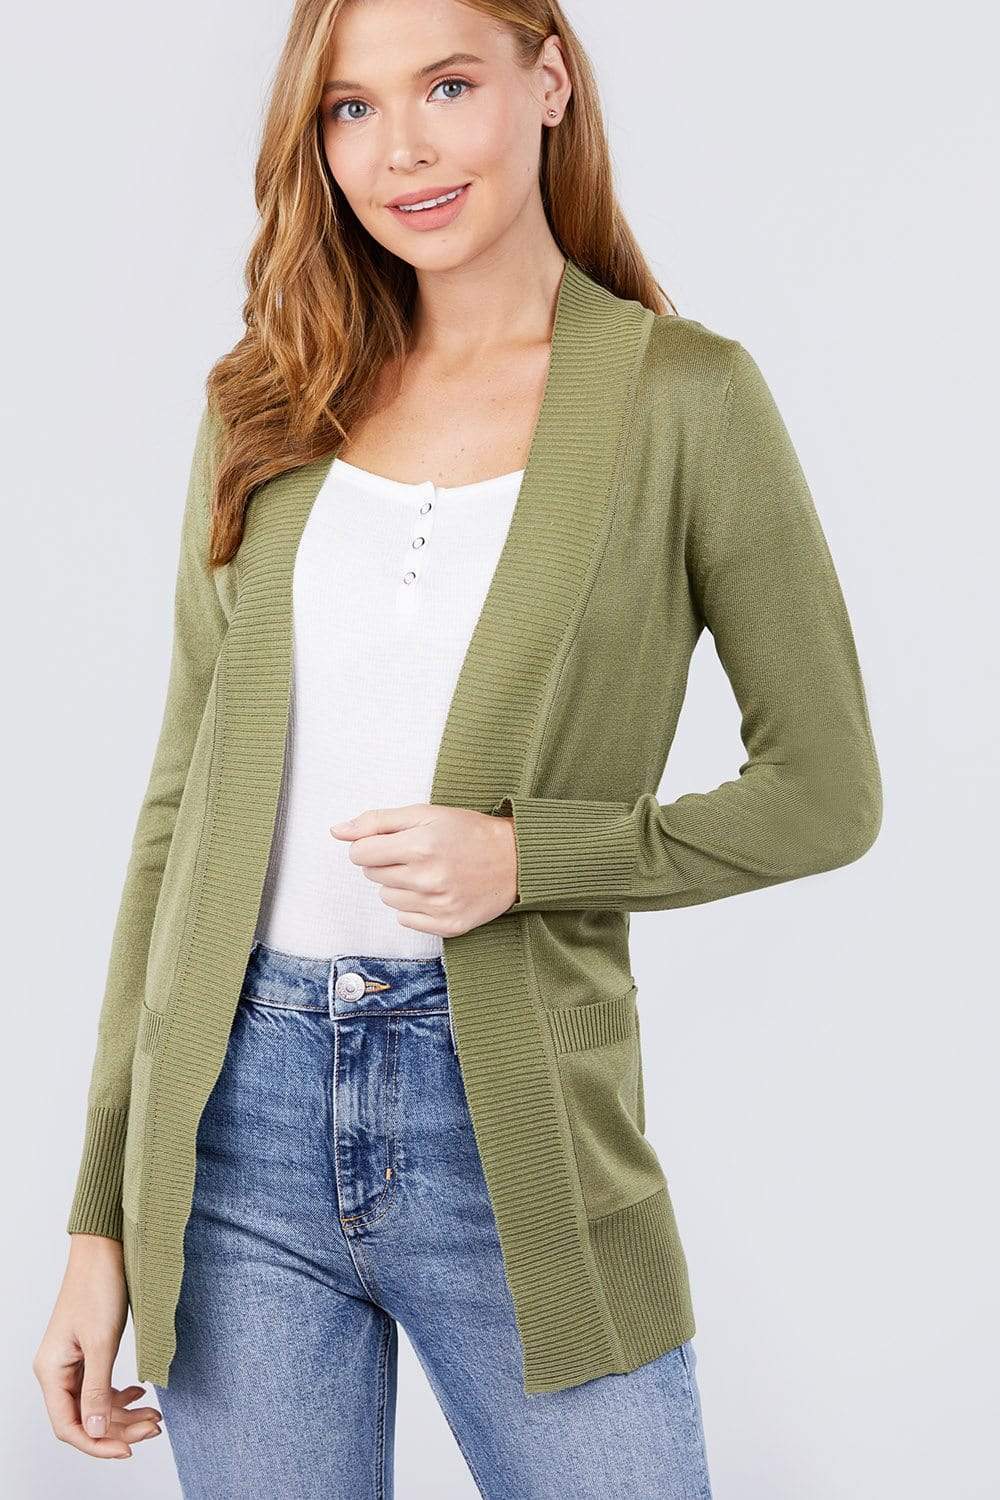 Long Sleeve Rib Banded Open Sweater Cardigan With Pockets-TOPS / DRESSES-[Adult]-[Female]-Avocado-S-Blue Zone Planet